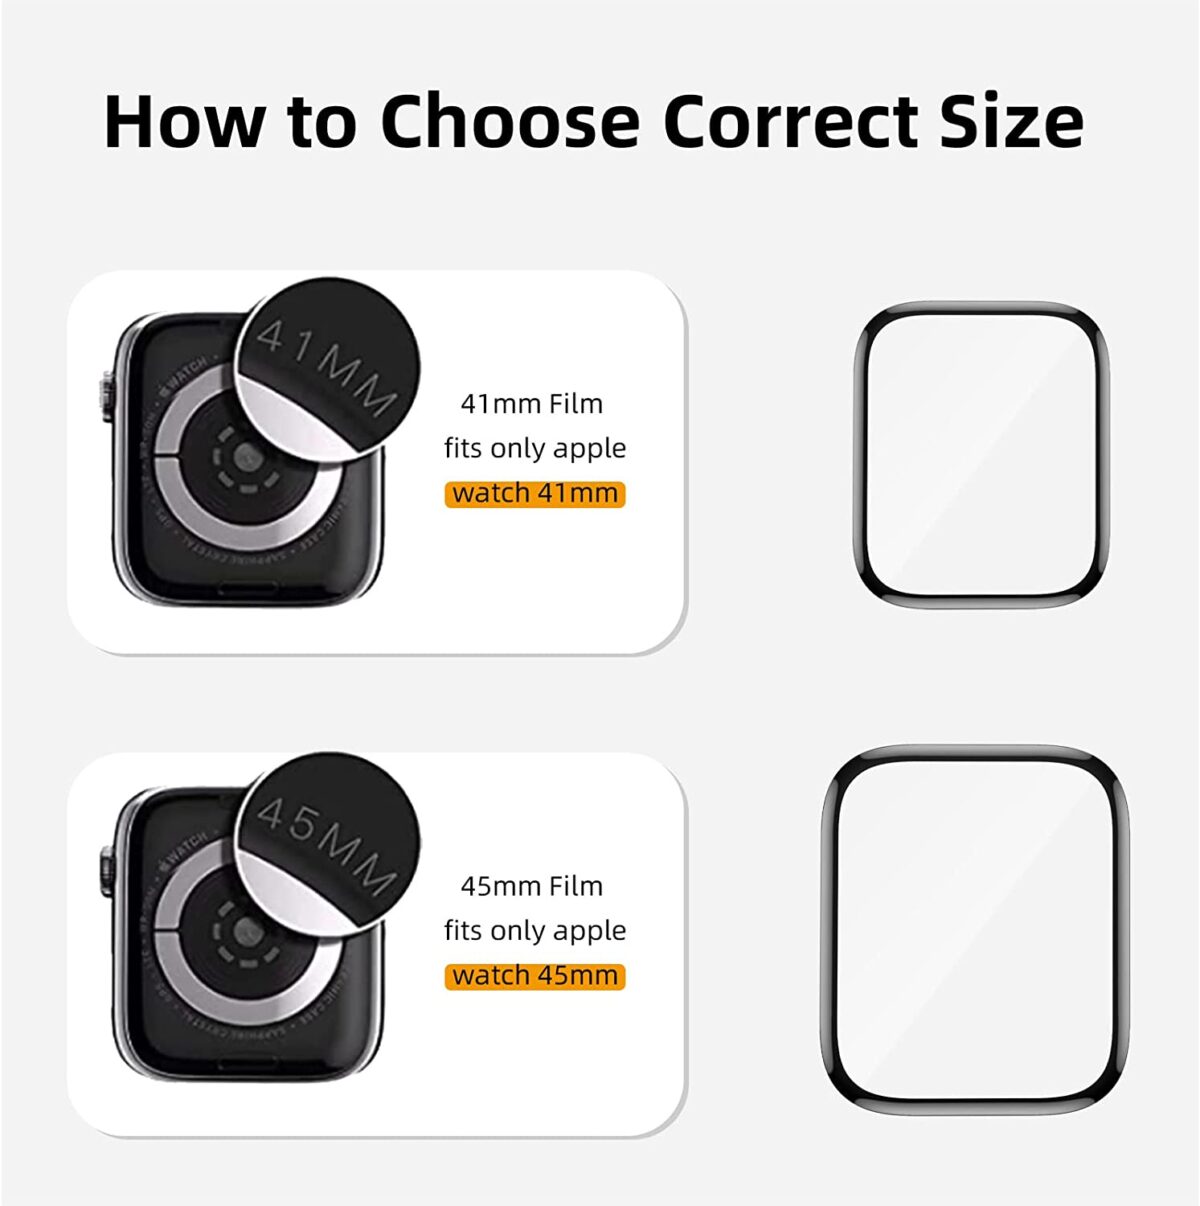 How to choose Correct size of your Apple Watch